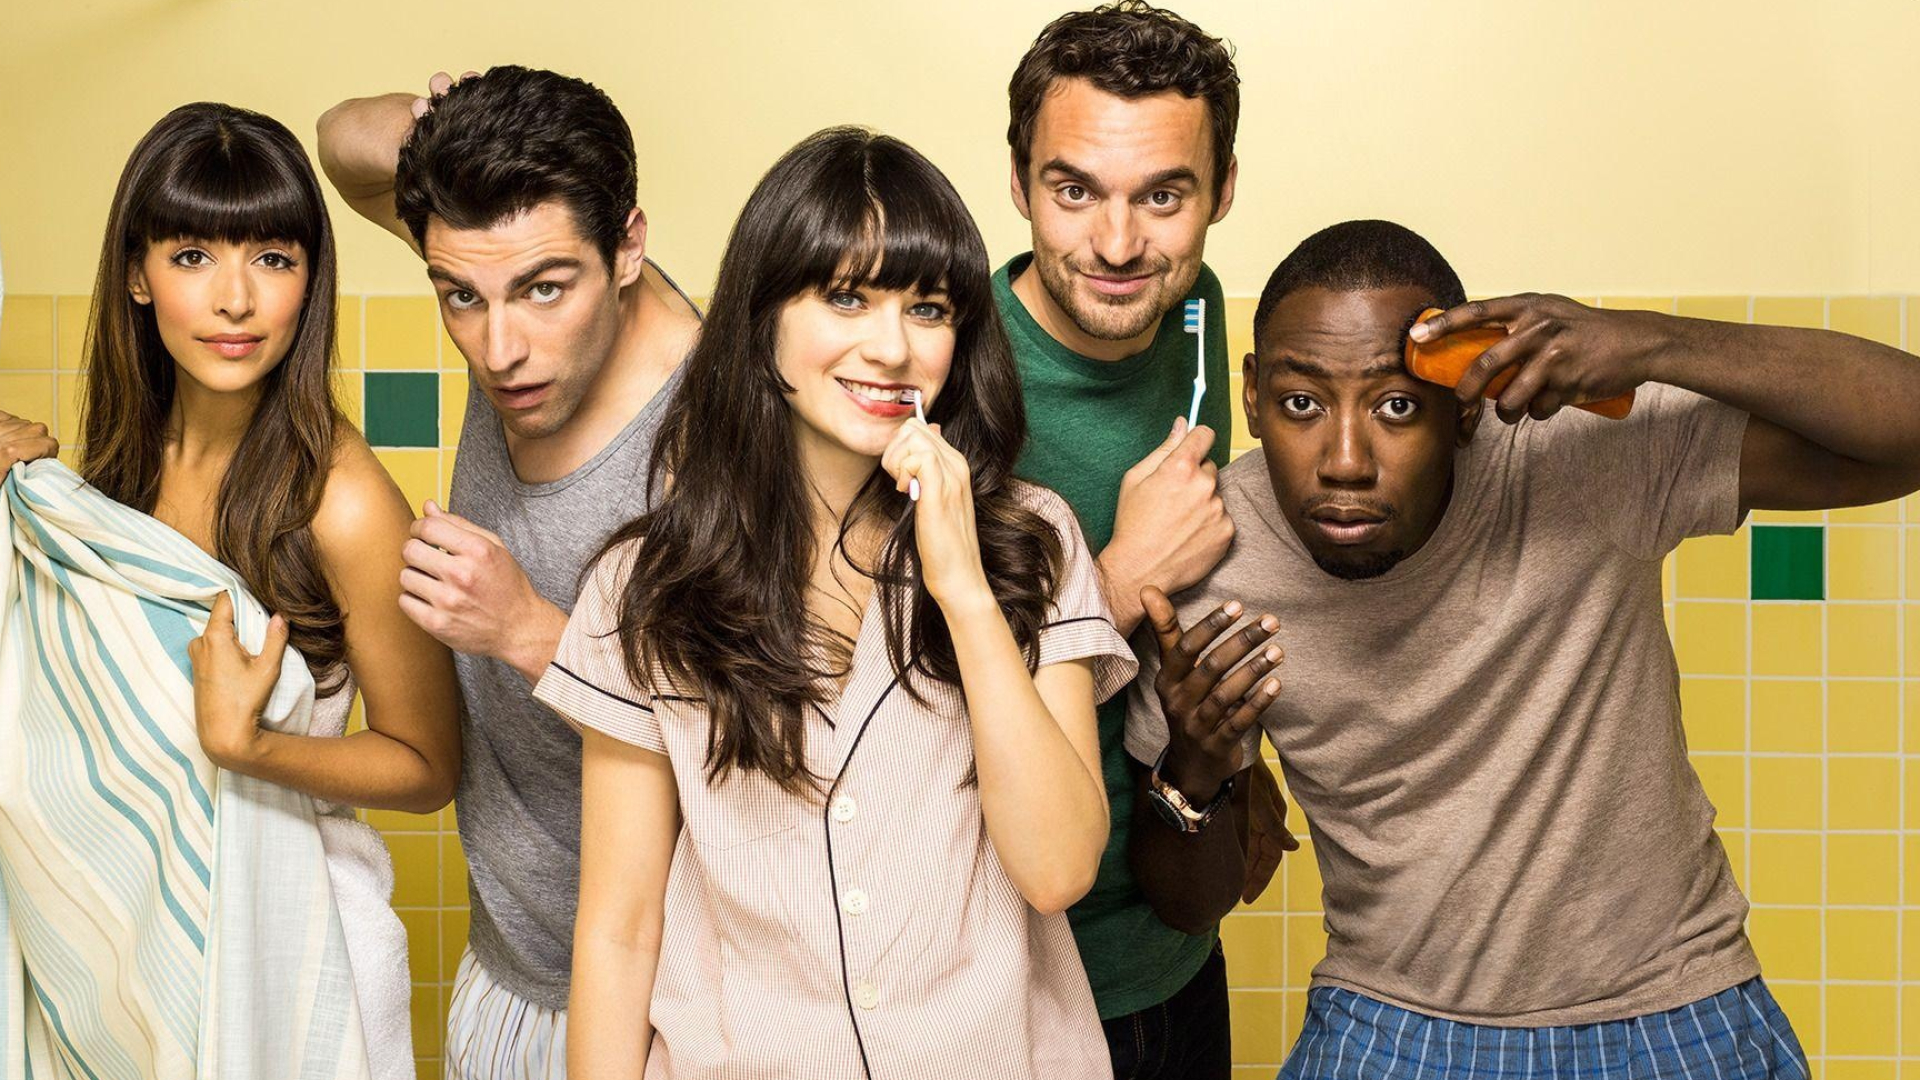 New Girl Tv Show Wallpapers posted by Zoey Sellers 1920x1080